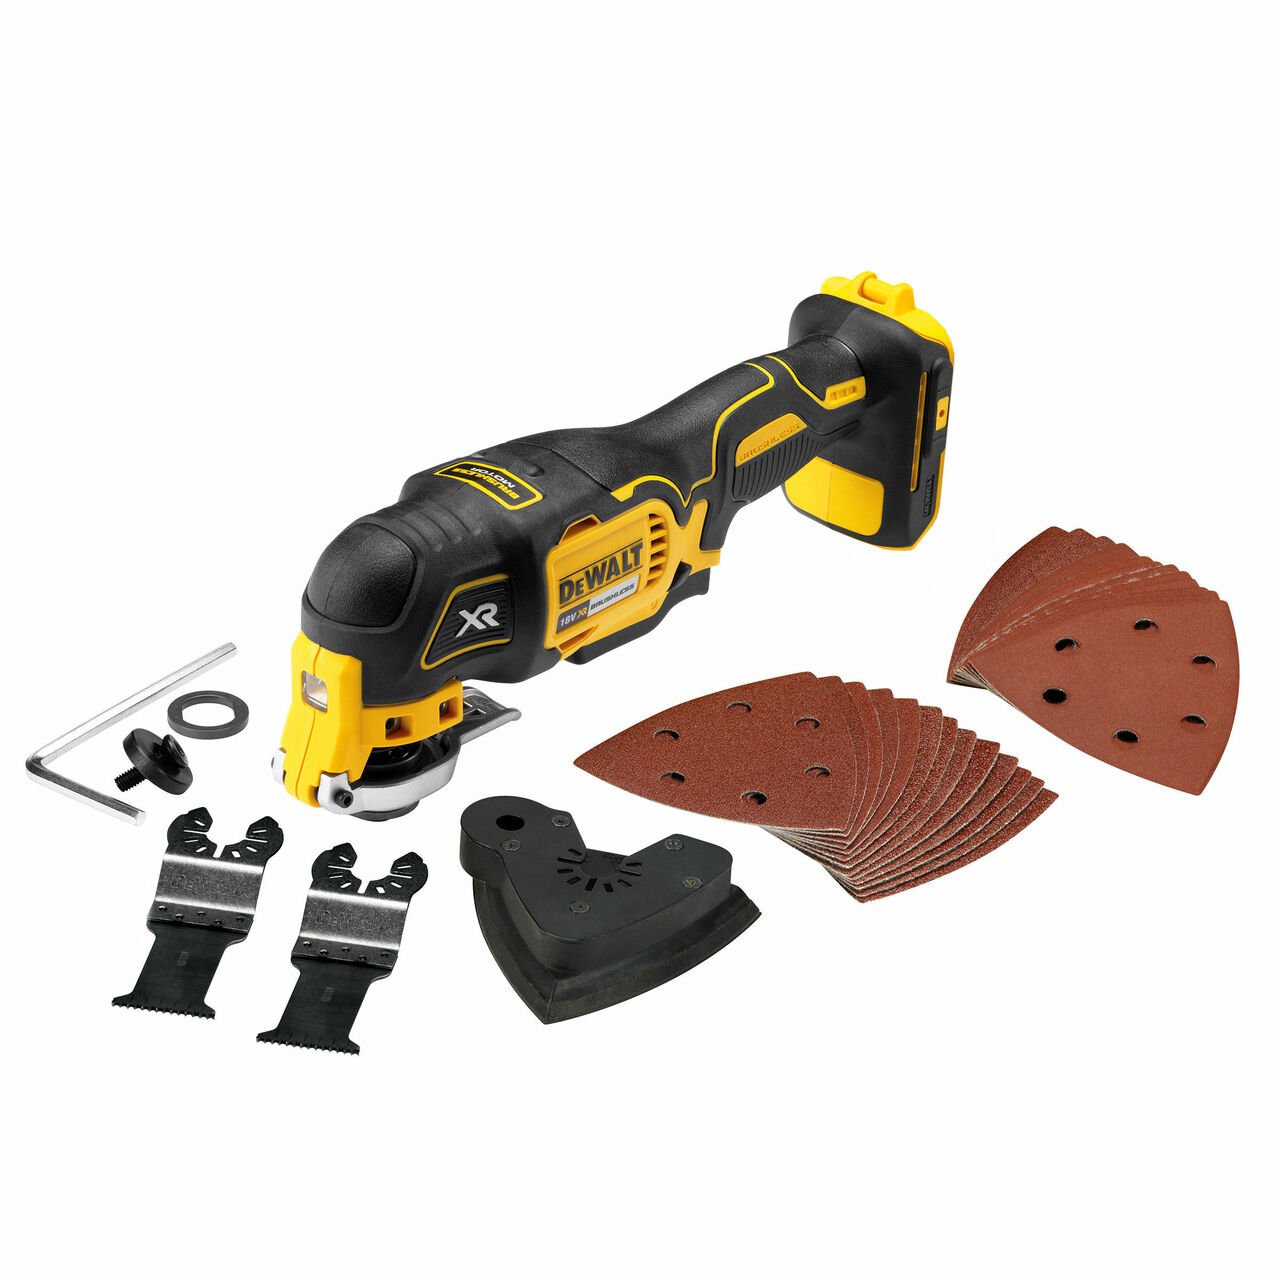 Image of Dewalt <br><strong>DCS355N 18V Multi Tool with 29 Accessories</strong>